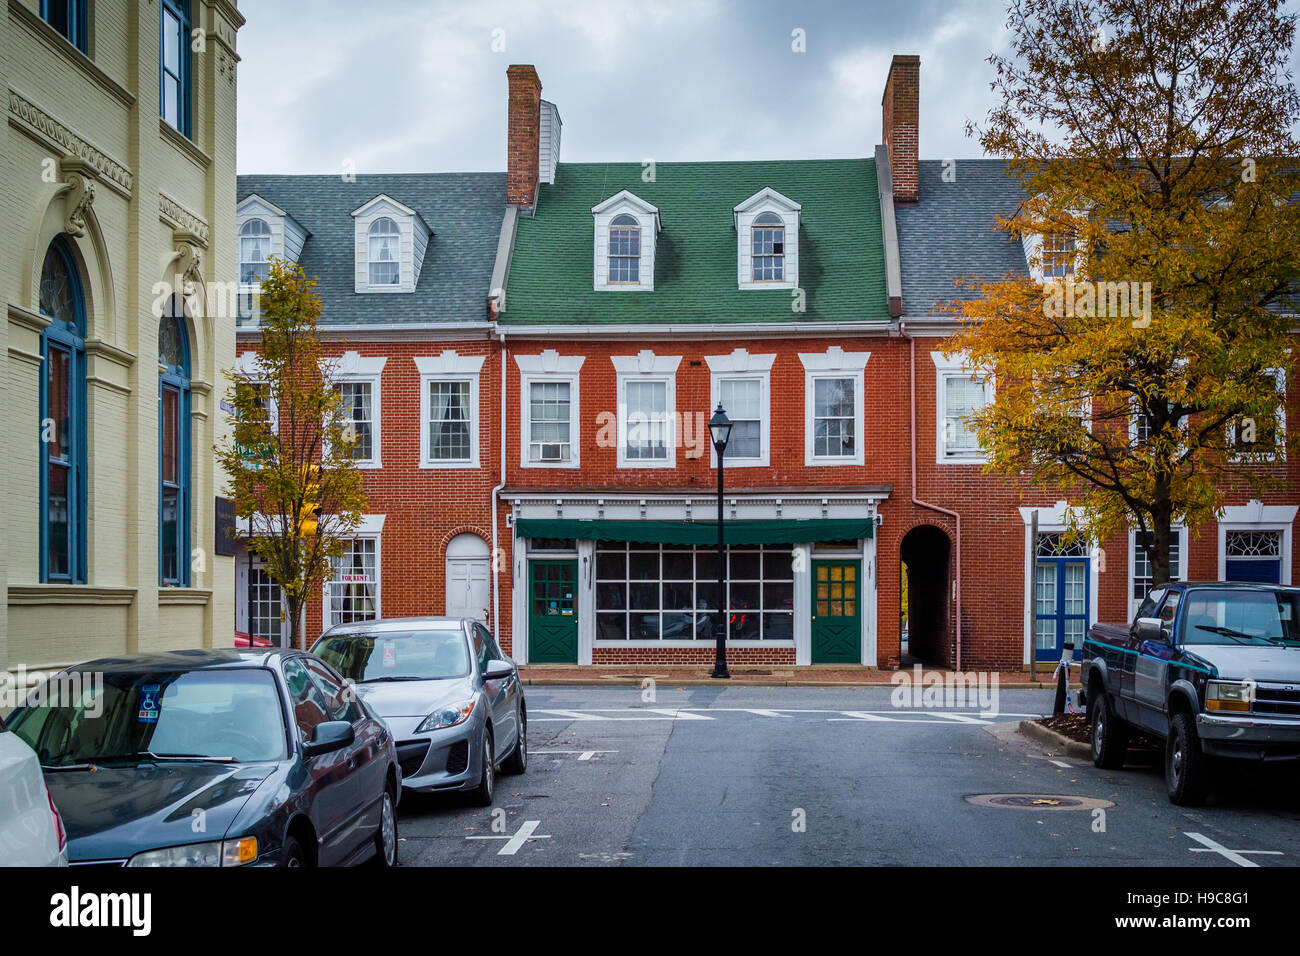 Autumn color and brick buildings in Easton, Maryland. Stock Photo